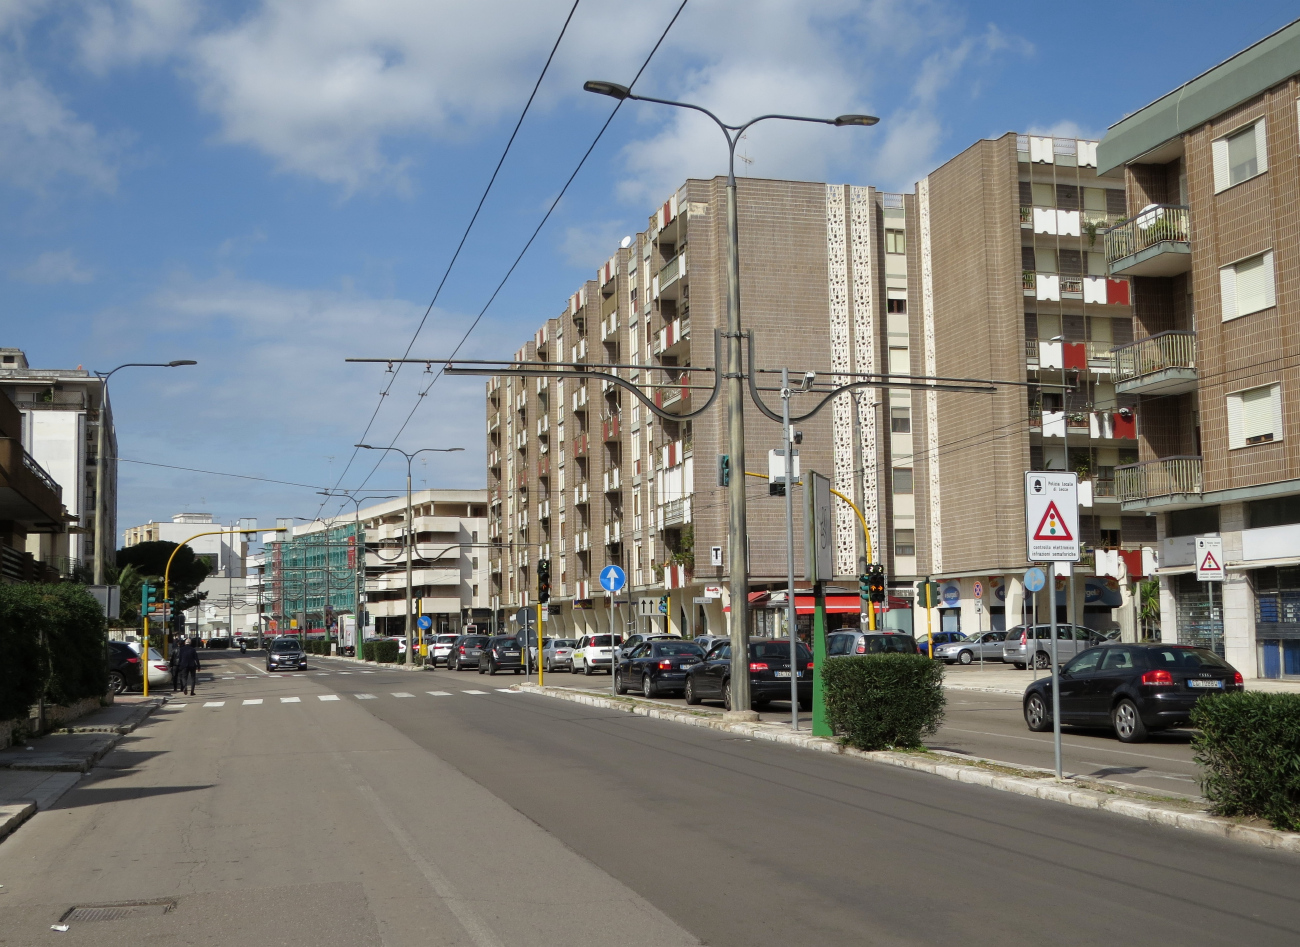 Lecce — Trolleybus Lines and Infrastructure